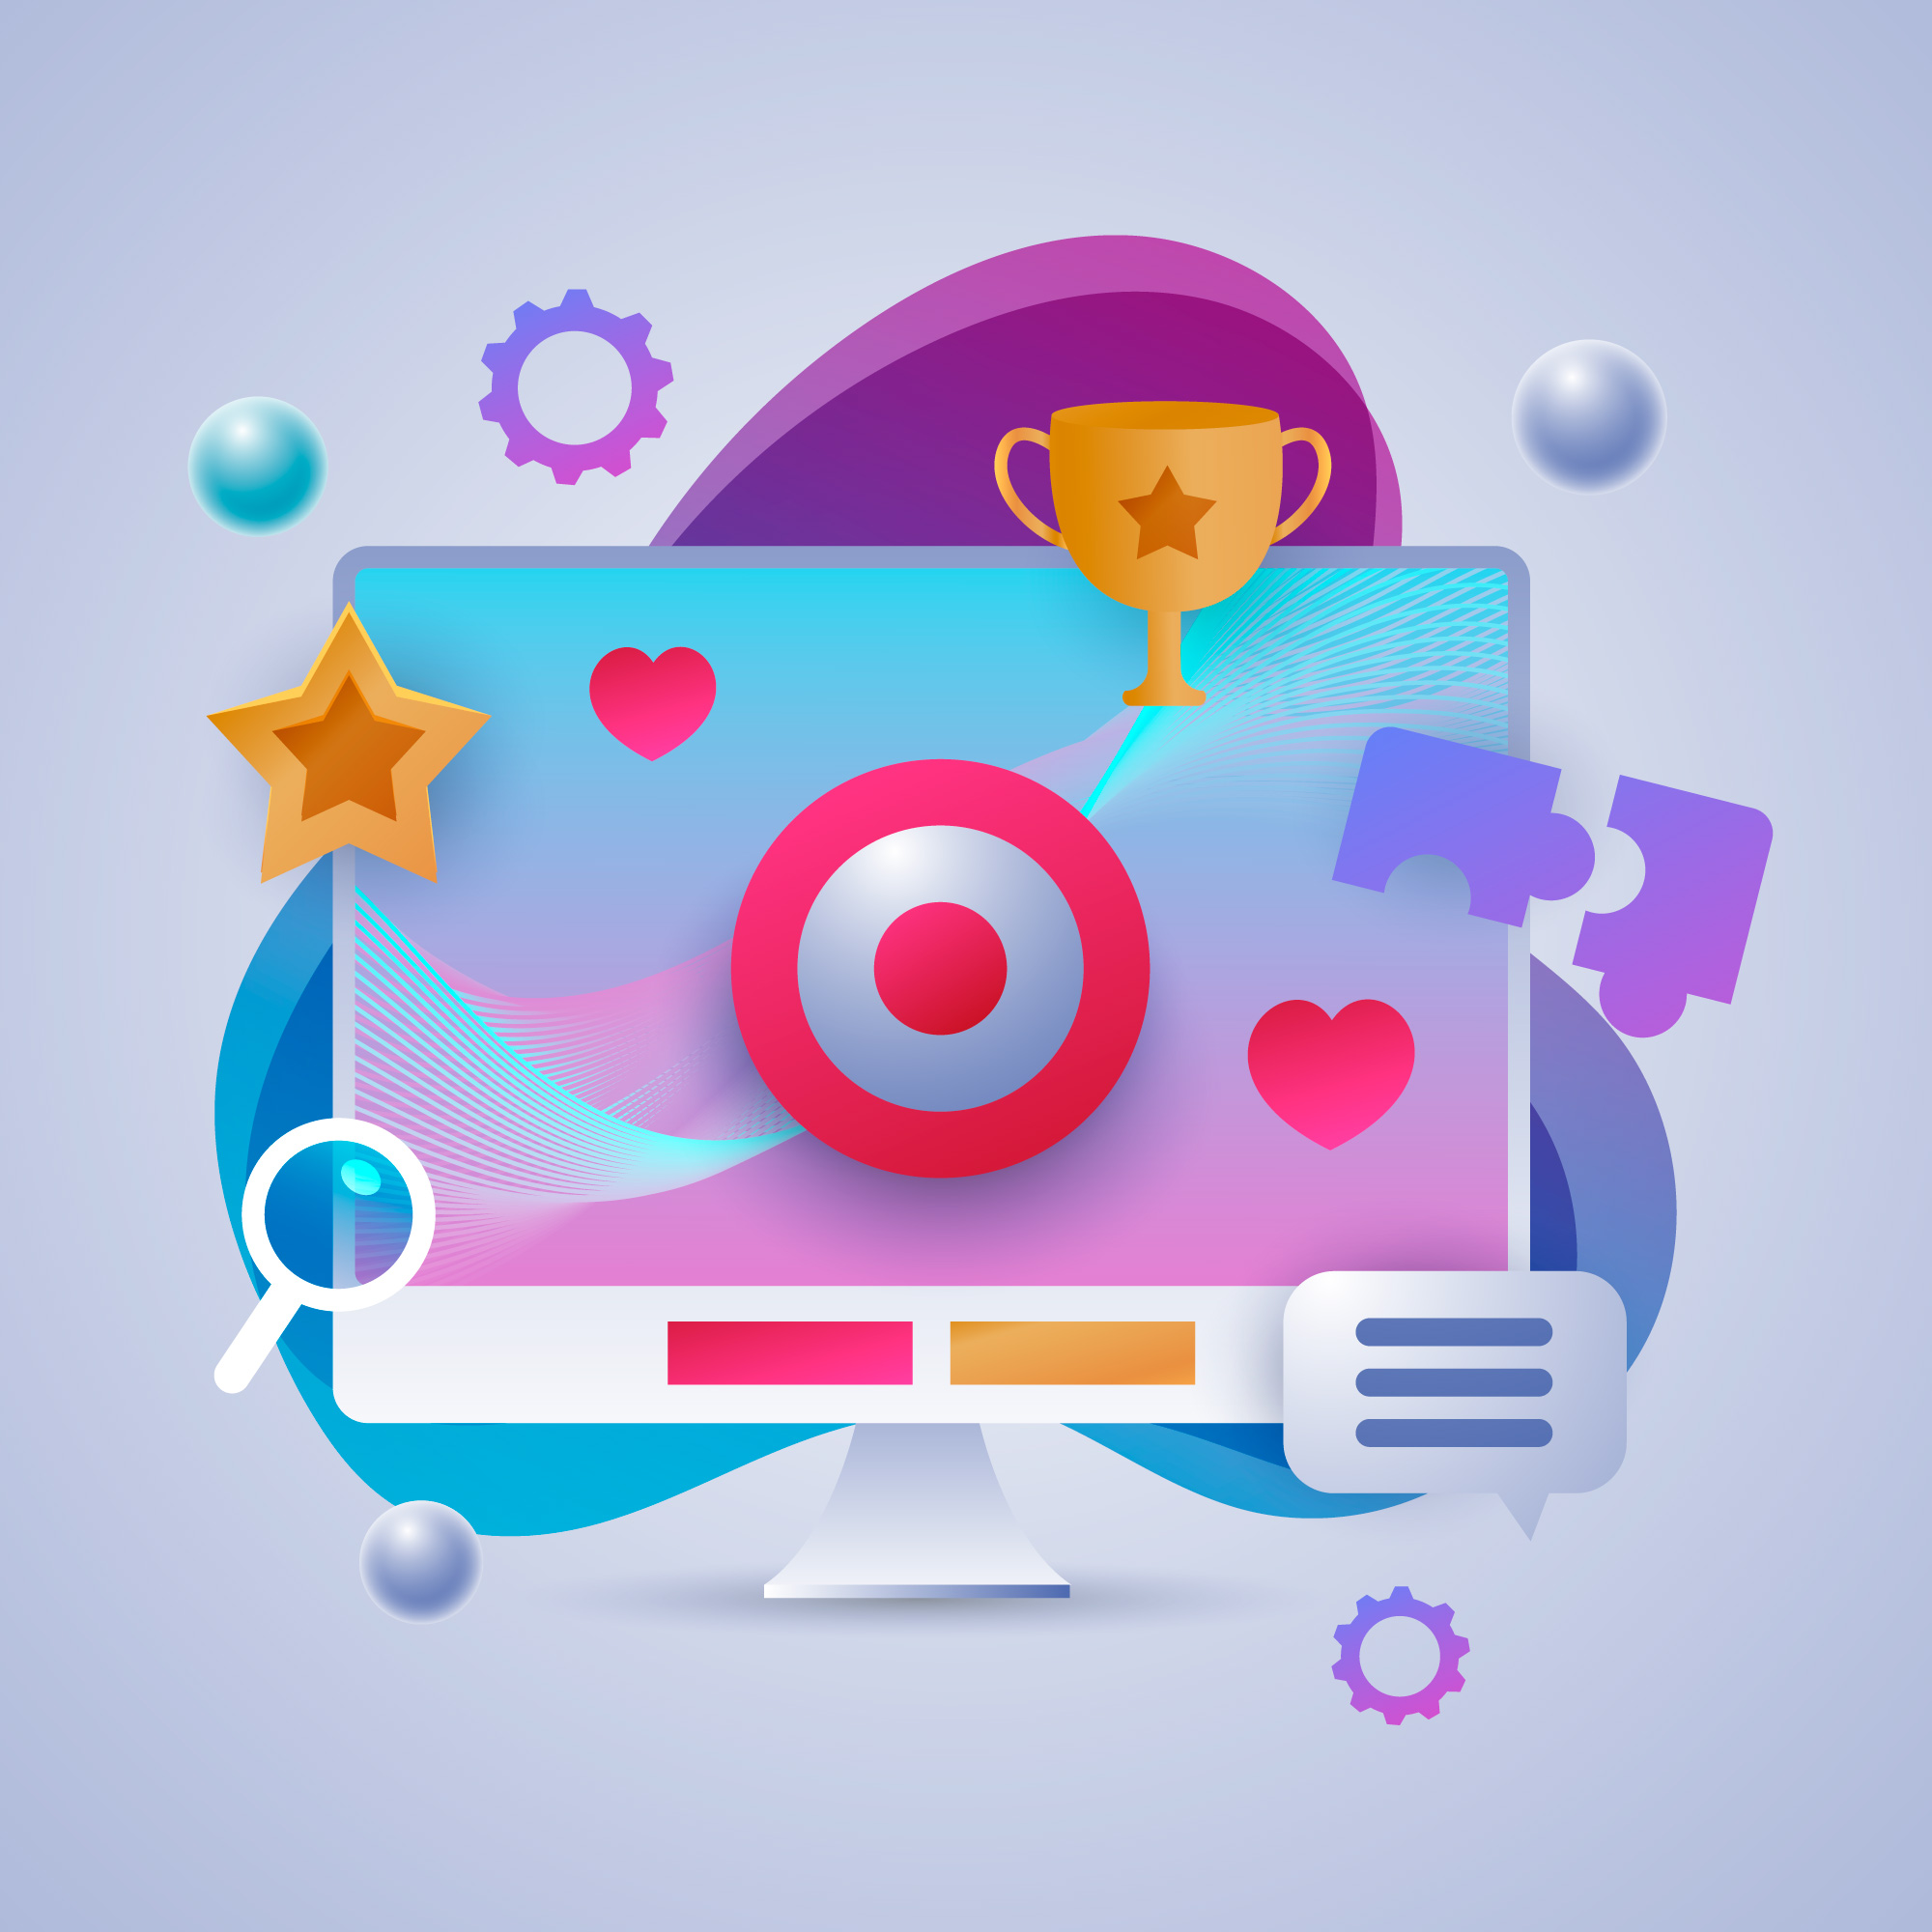 7 Best Gamification Campaign examples and ideas - Adact - Gamification  Marketing Software